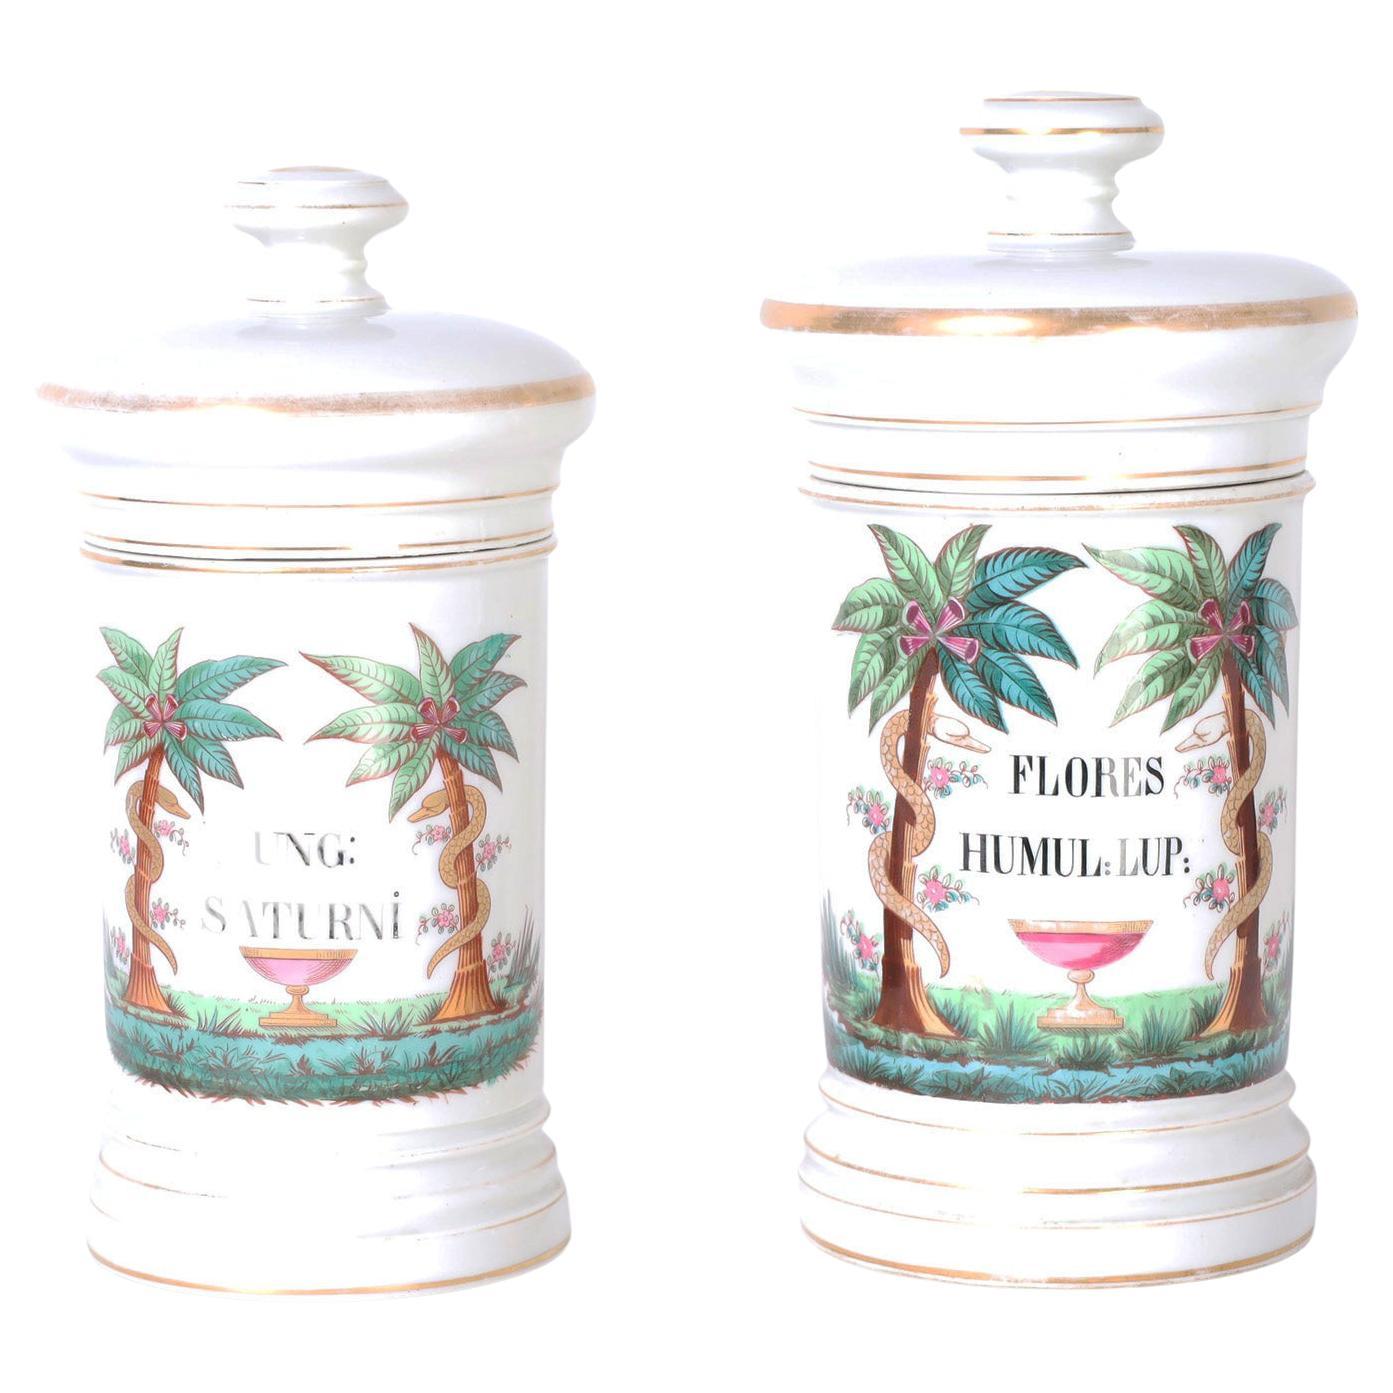 Near Pair of French Porcelain Apothecary Lidded Jars